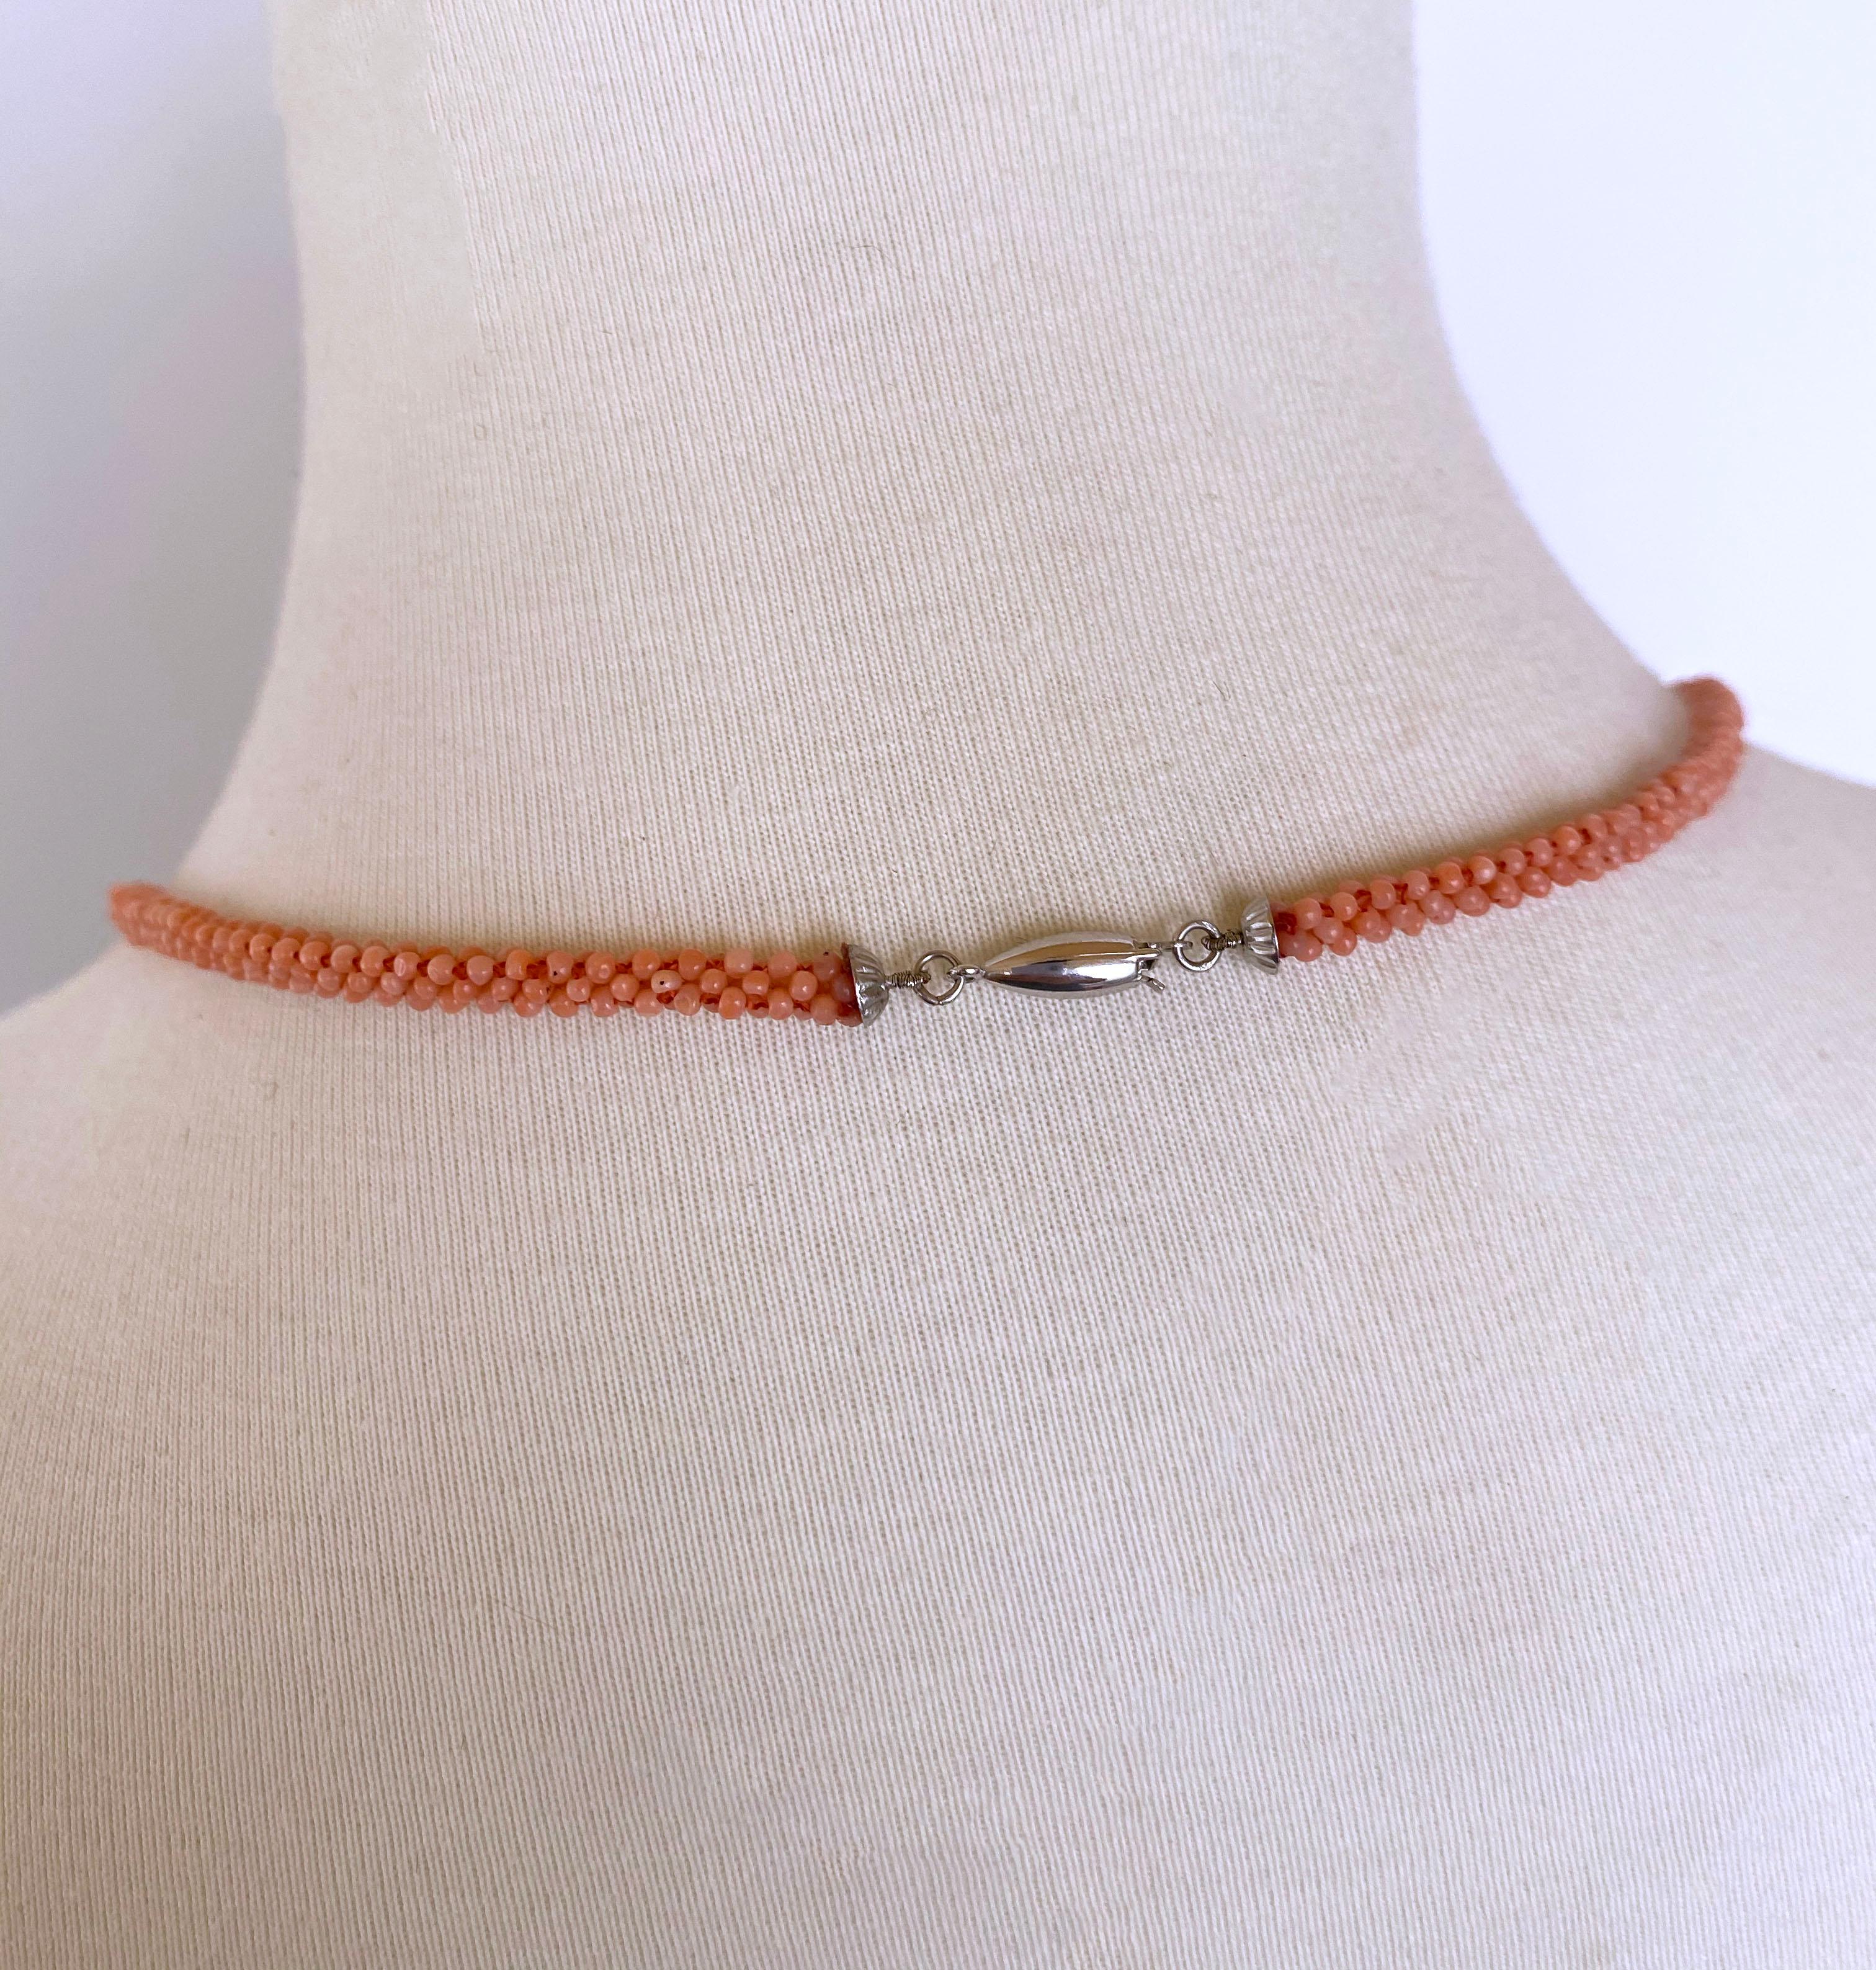 Artisan Marian J. Woven Mediterranean Coral Rope Necklace with 14K White Gold and Tassel For Sale